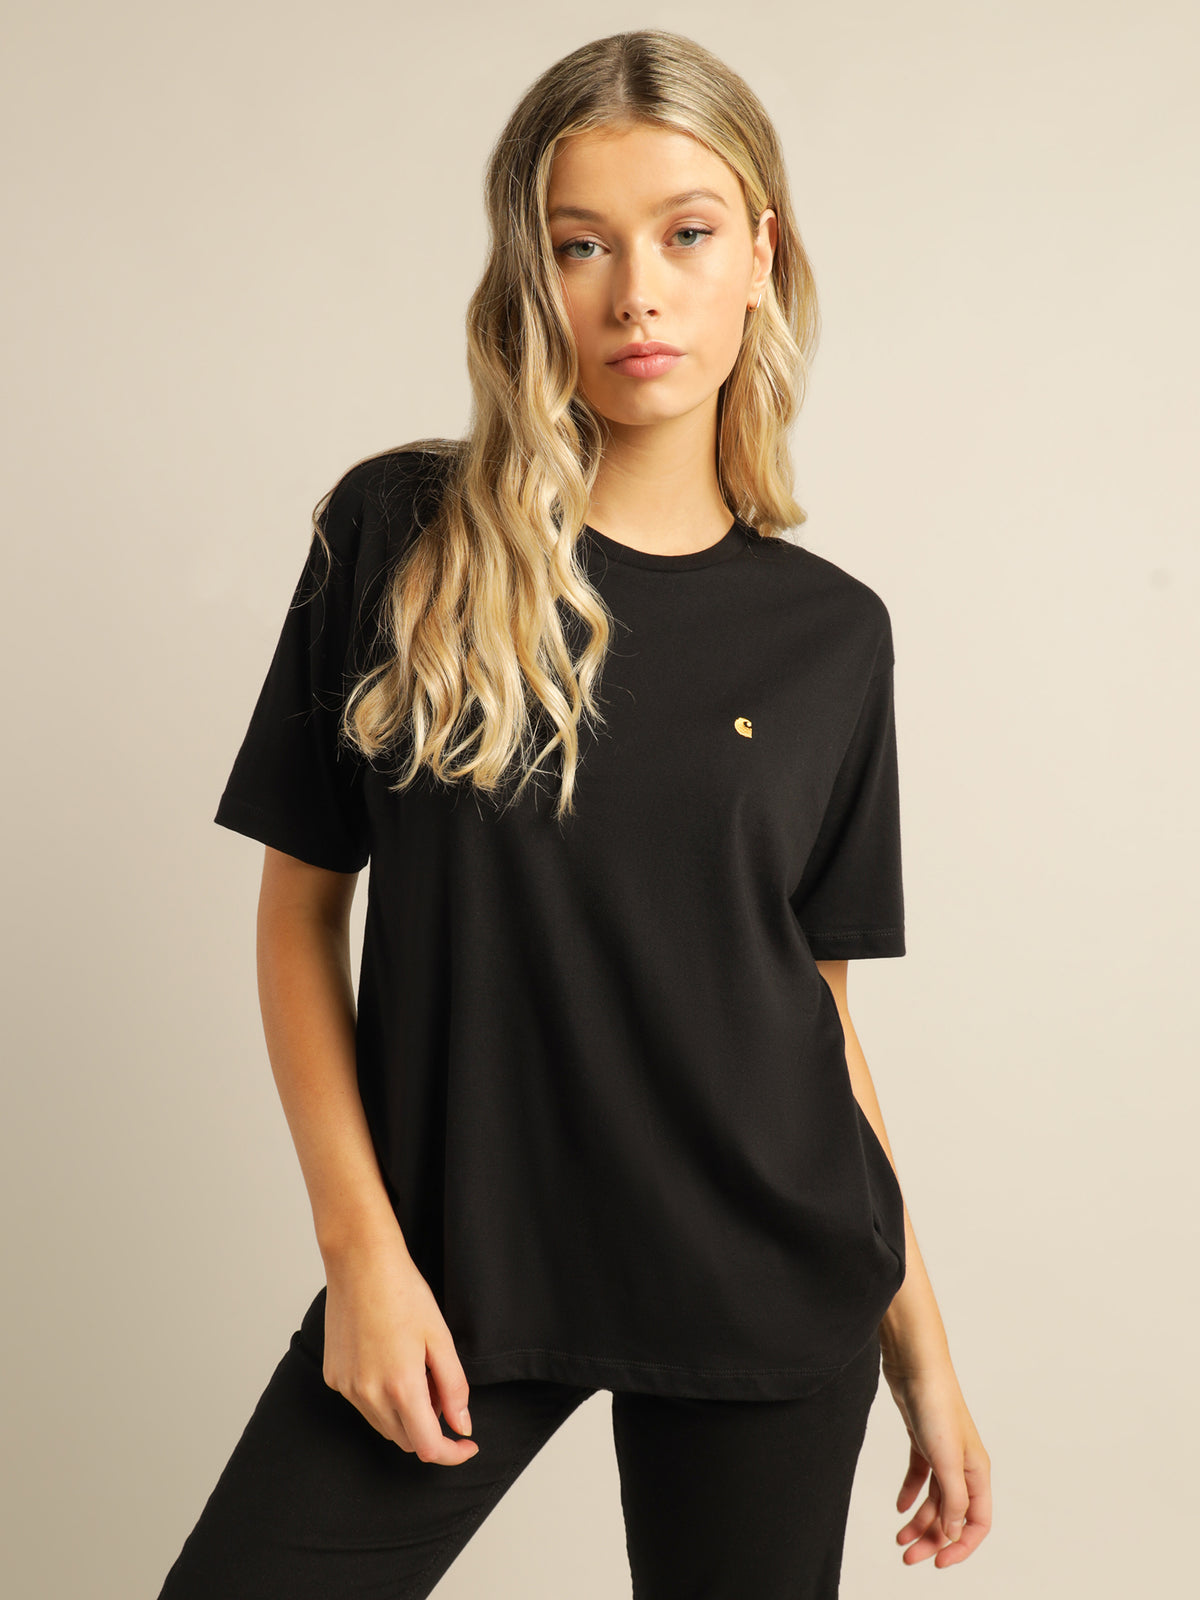 Short Sleeve Chase T-Shirt in Black and Gold